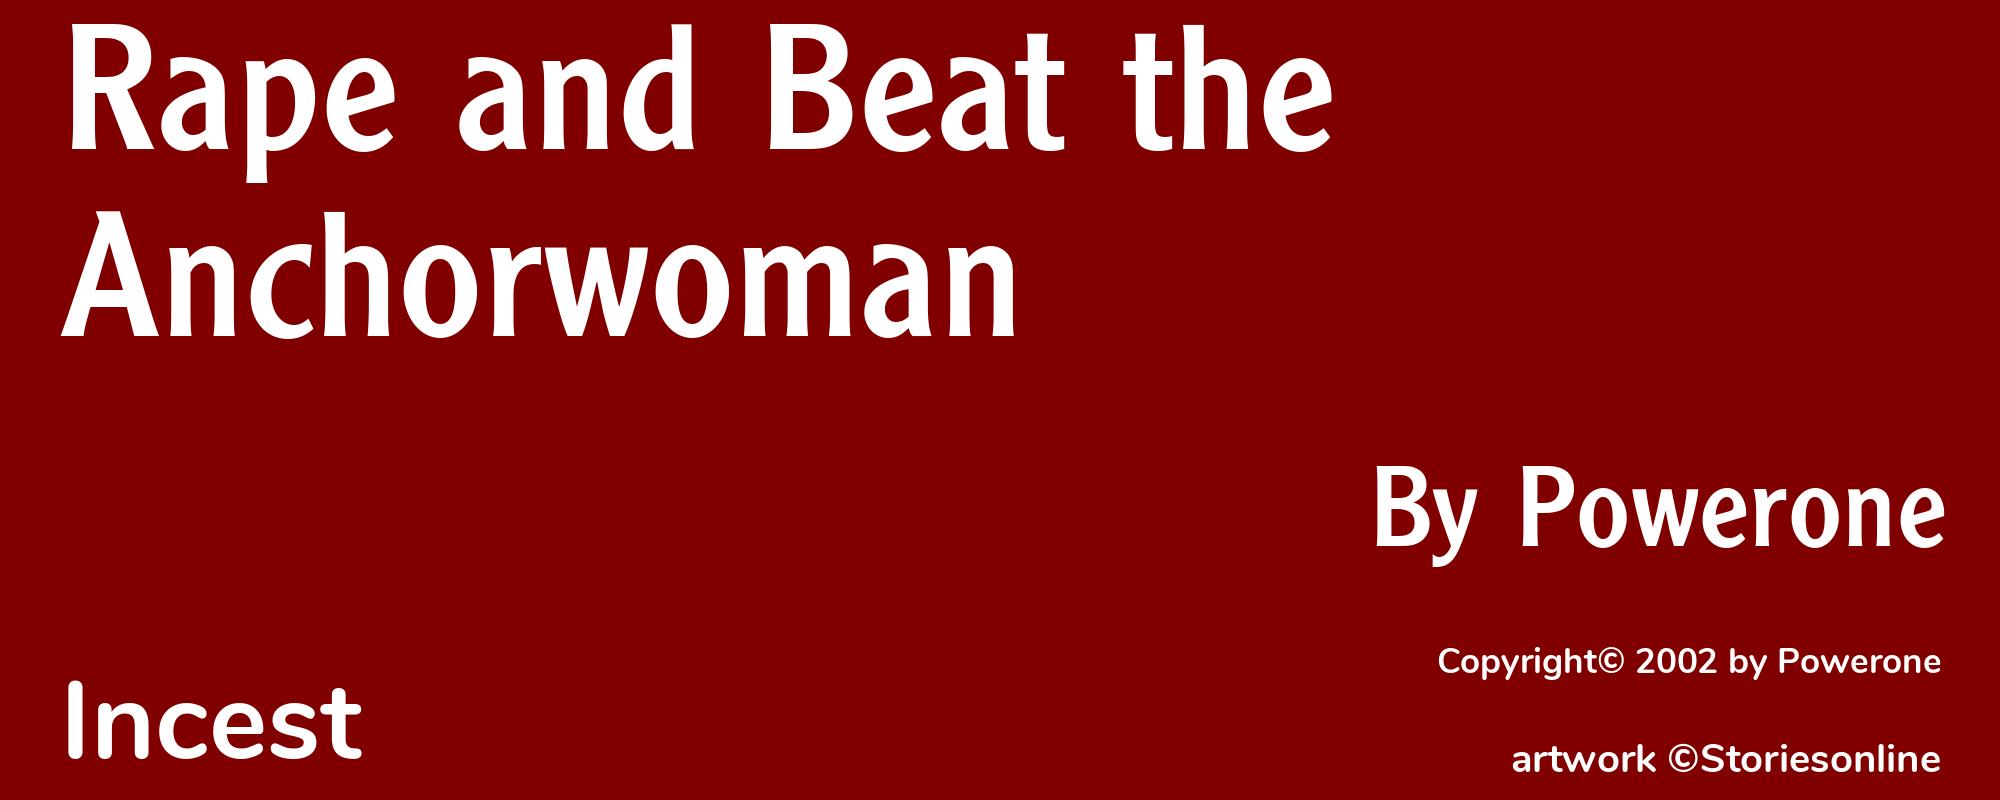 Rape and Beat the Anchorwoman - Cover